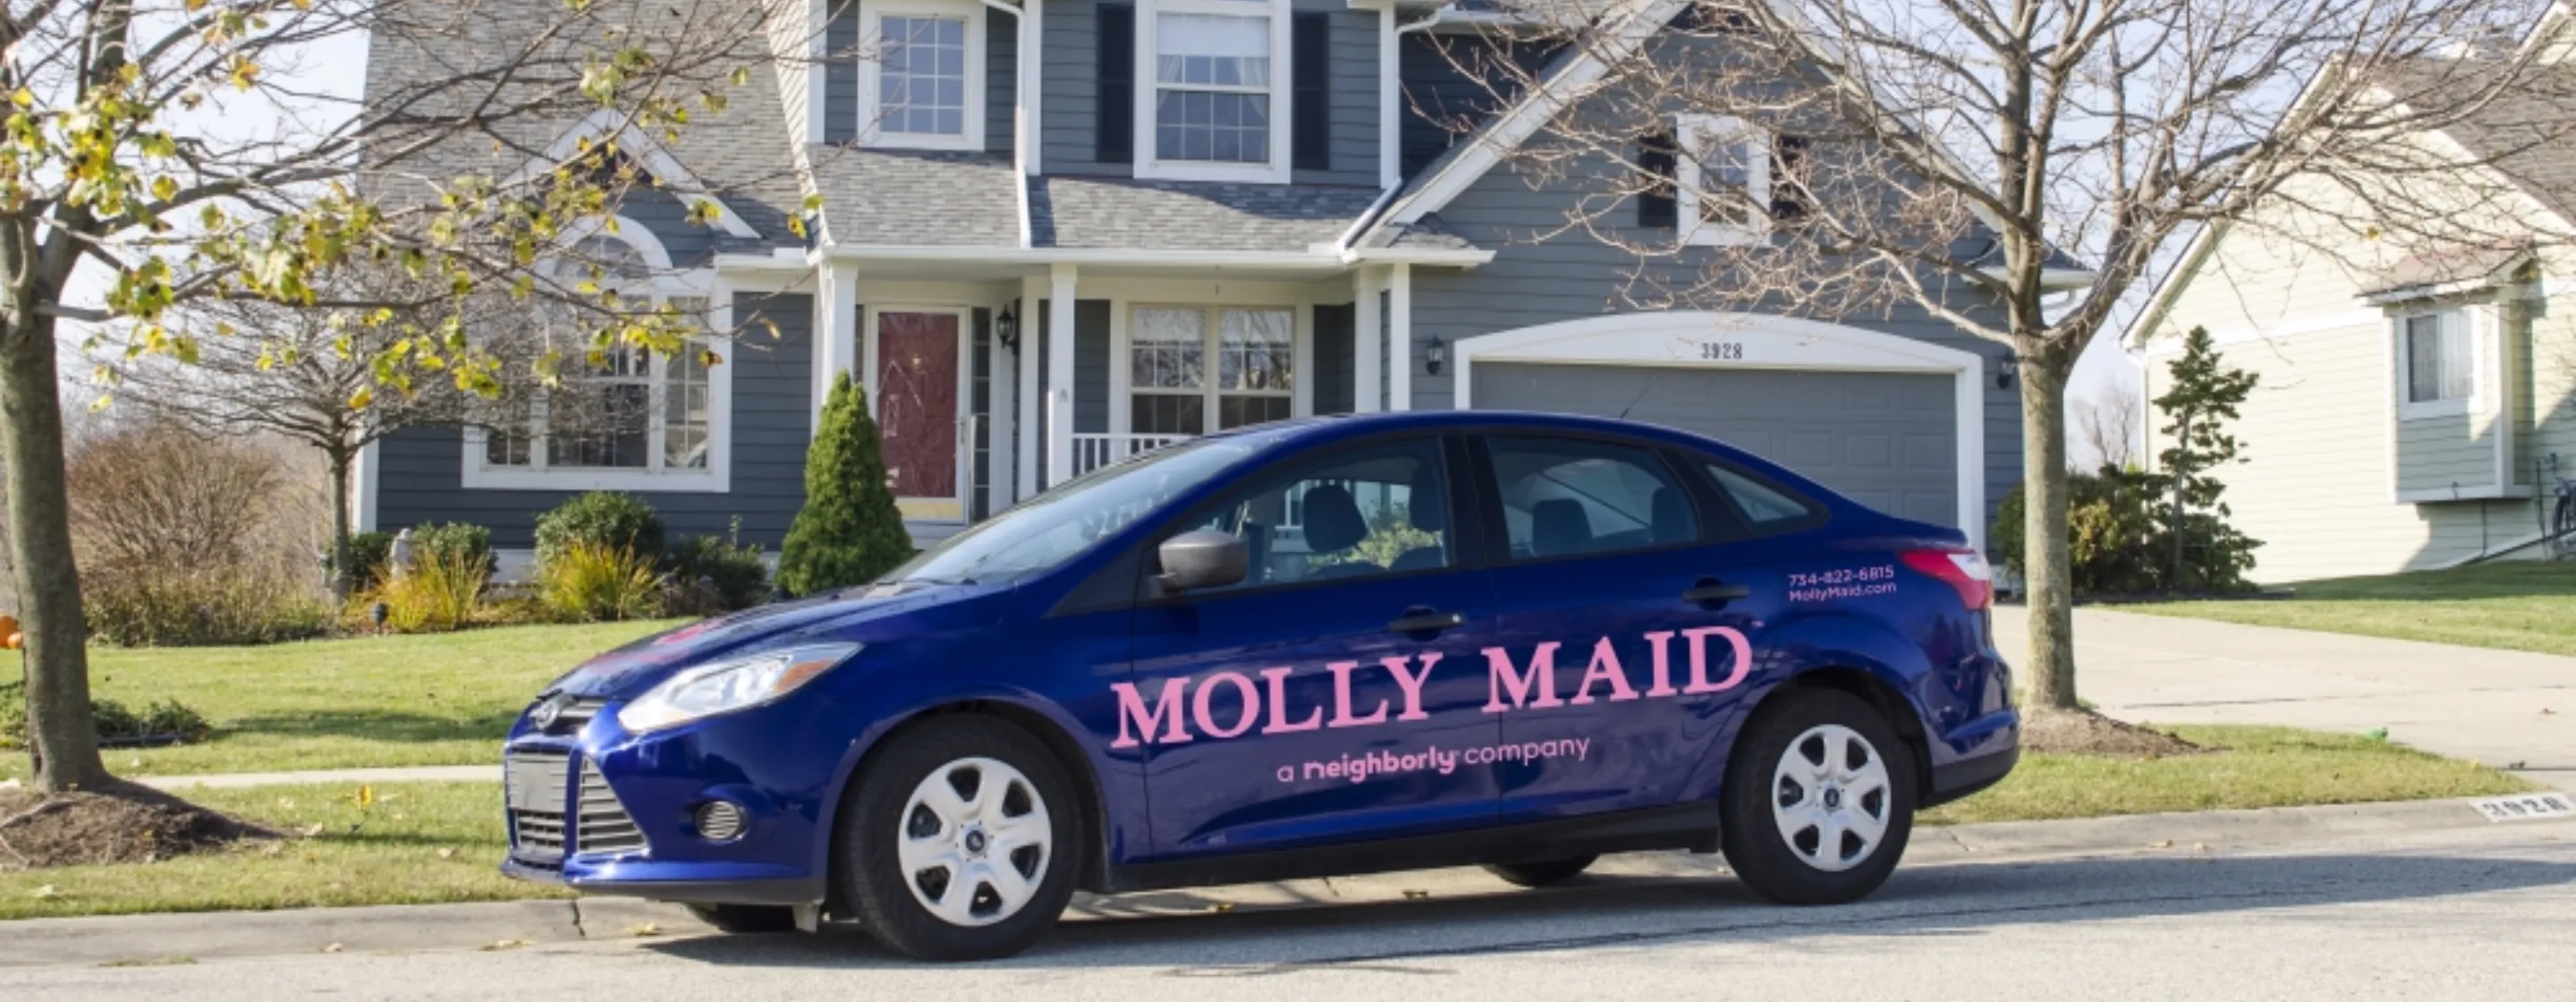 Branded Molly Maid car parked in front of home.